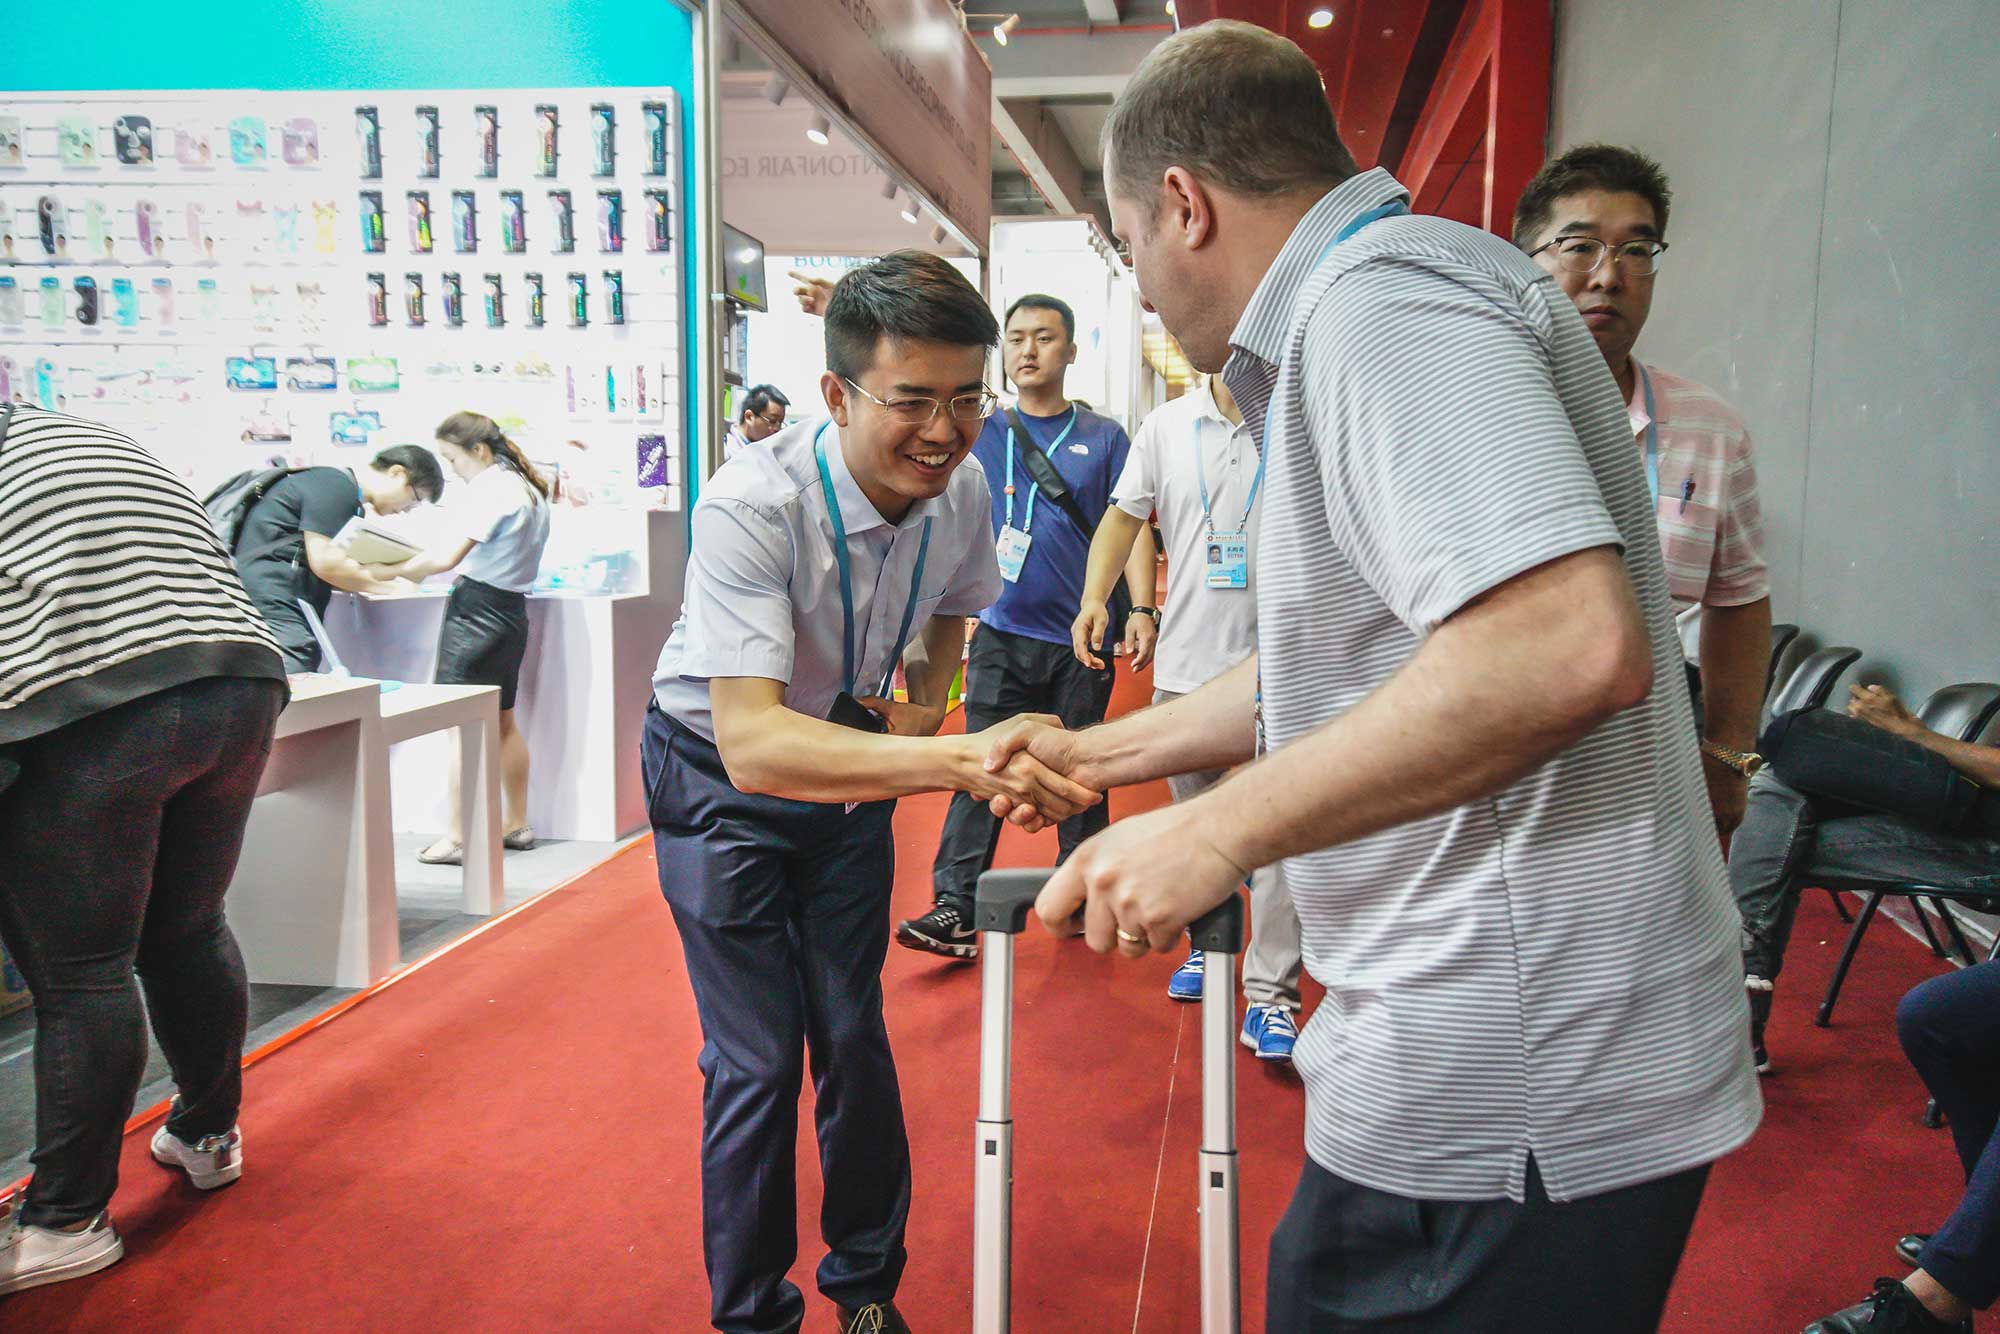 Meeting with Suppliers at the Canton Fair